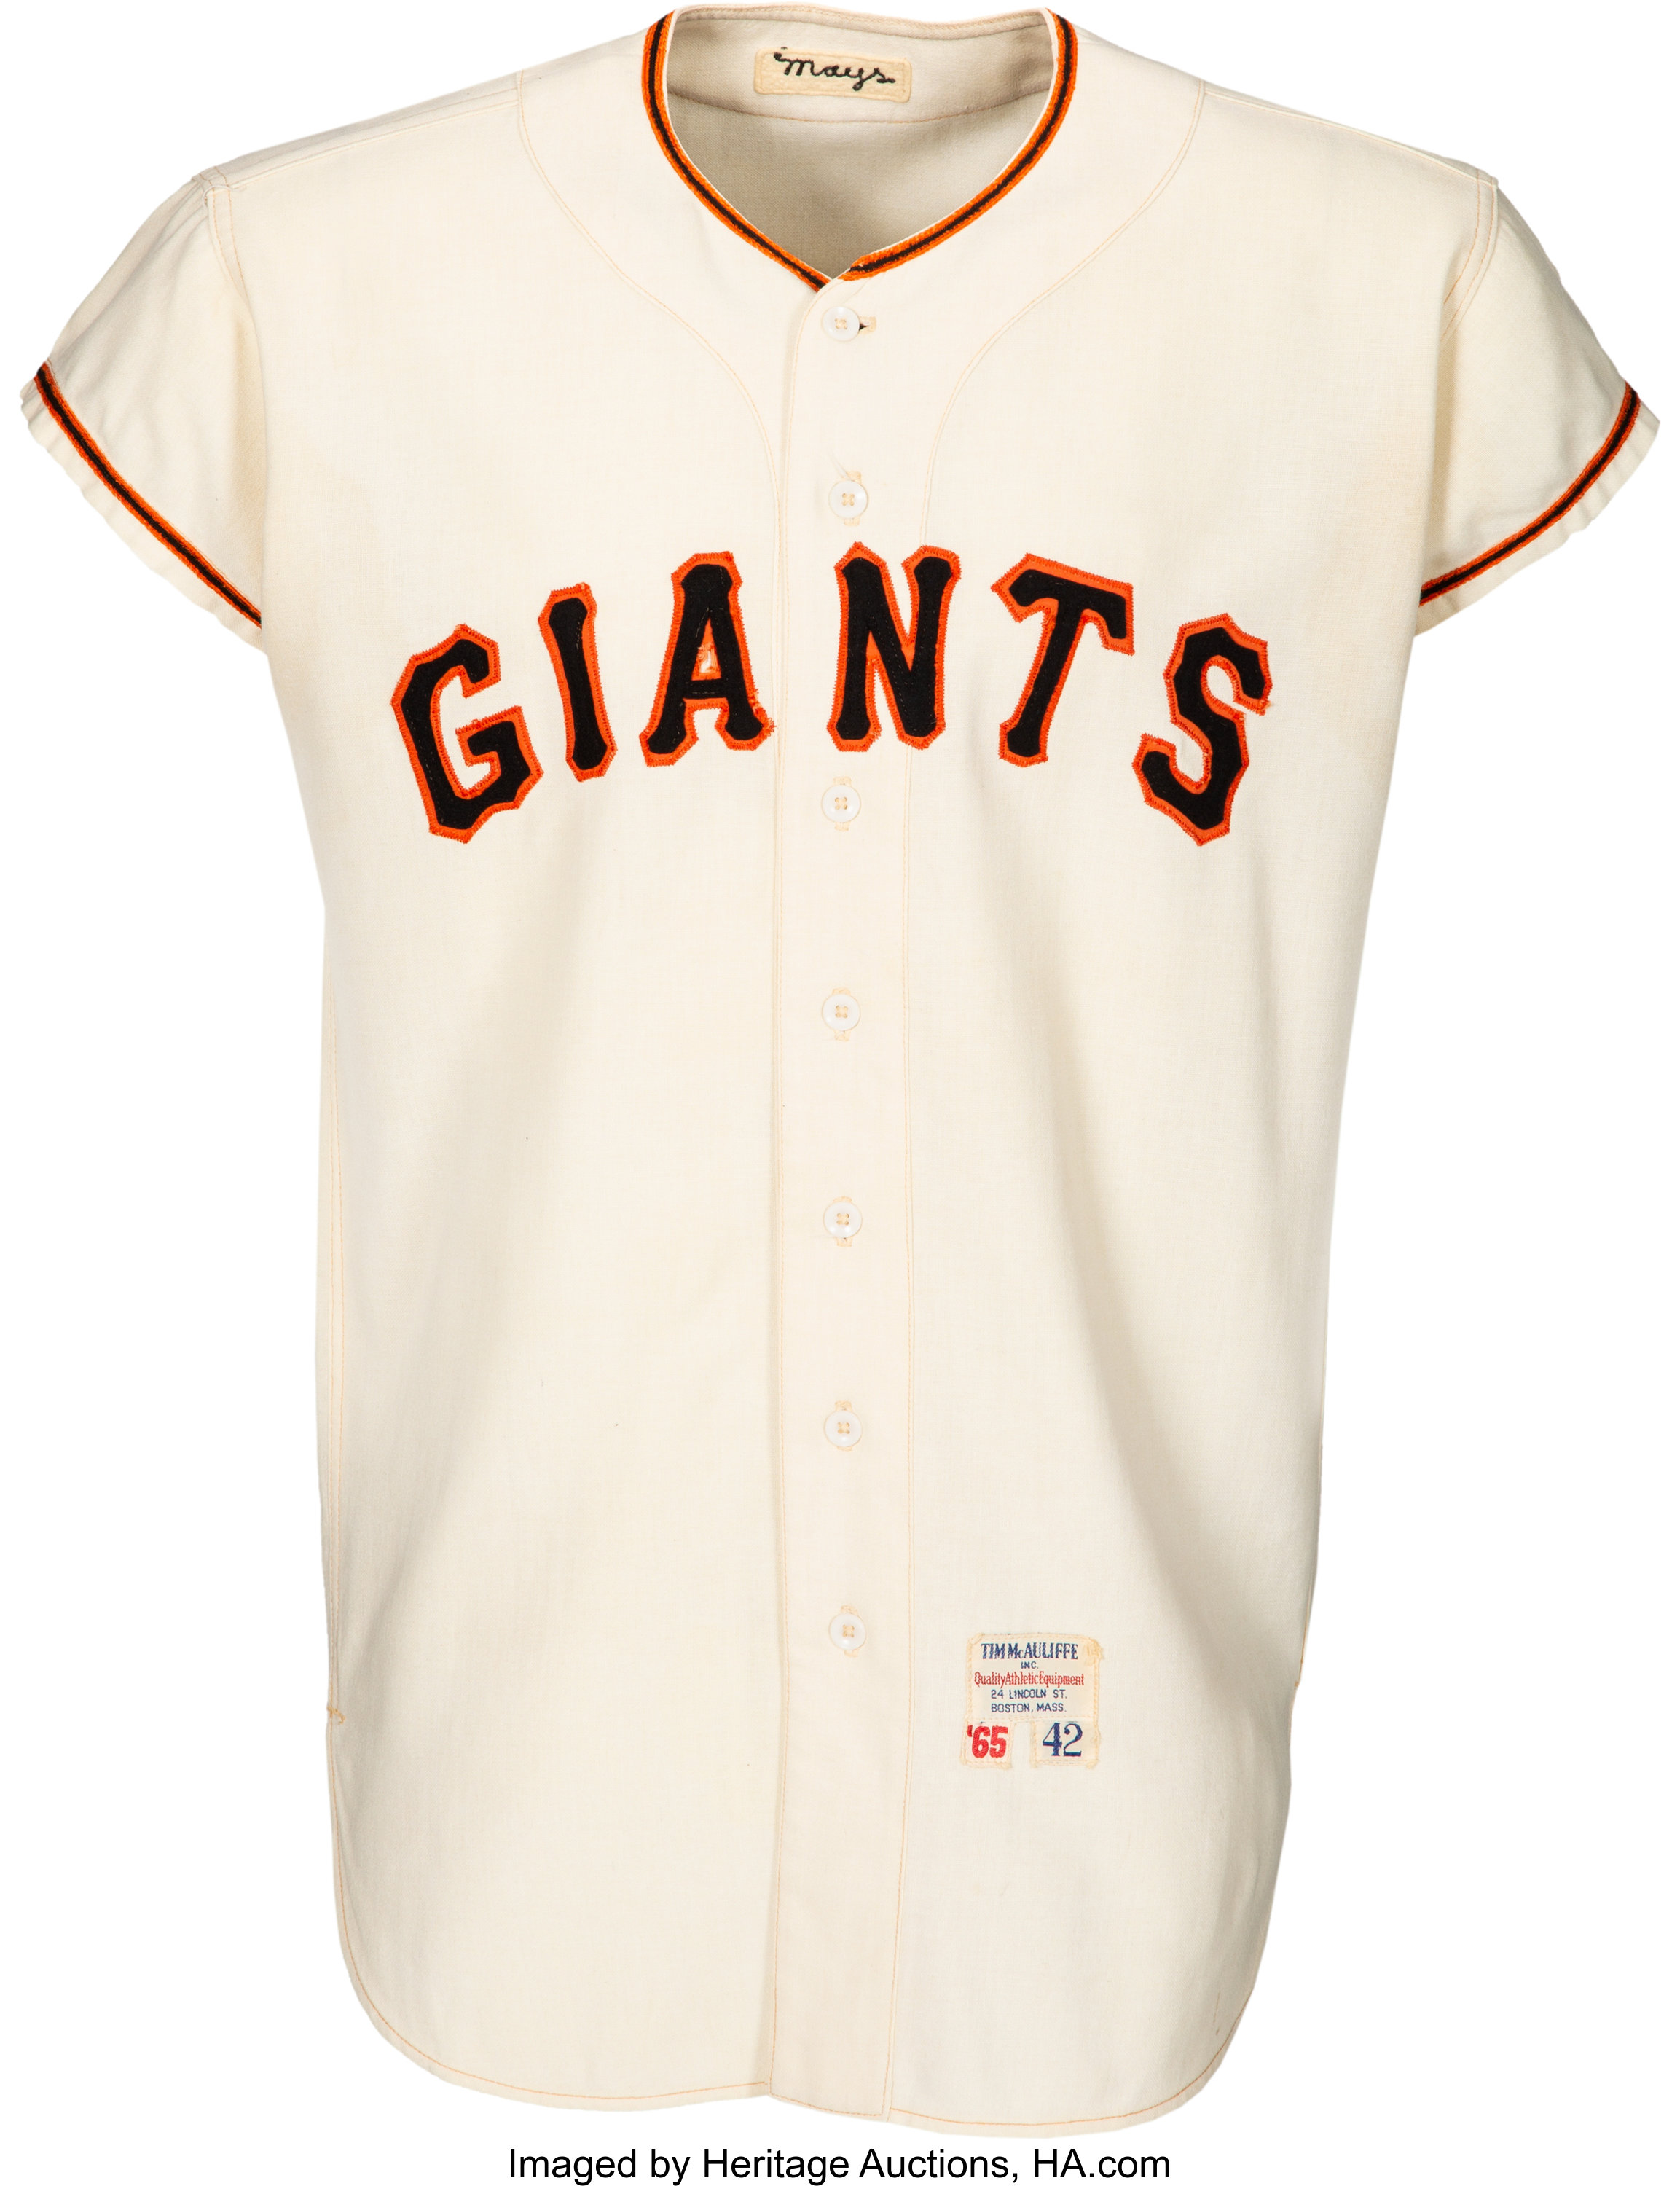 A closeup of the San Francisco Giants logo on a jersey sleeve during  News Photo - Getty Images